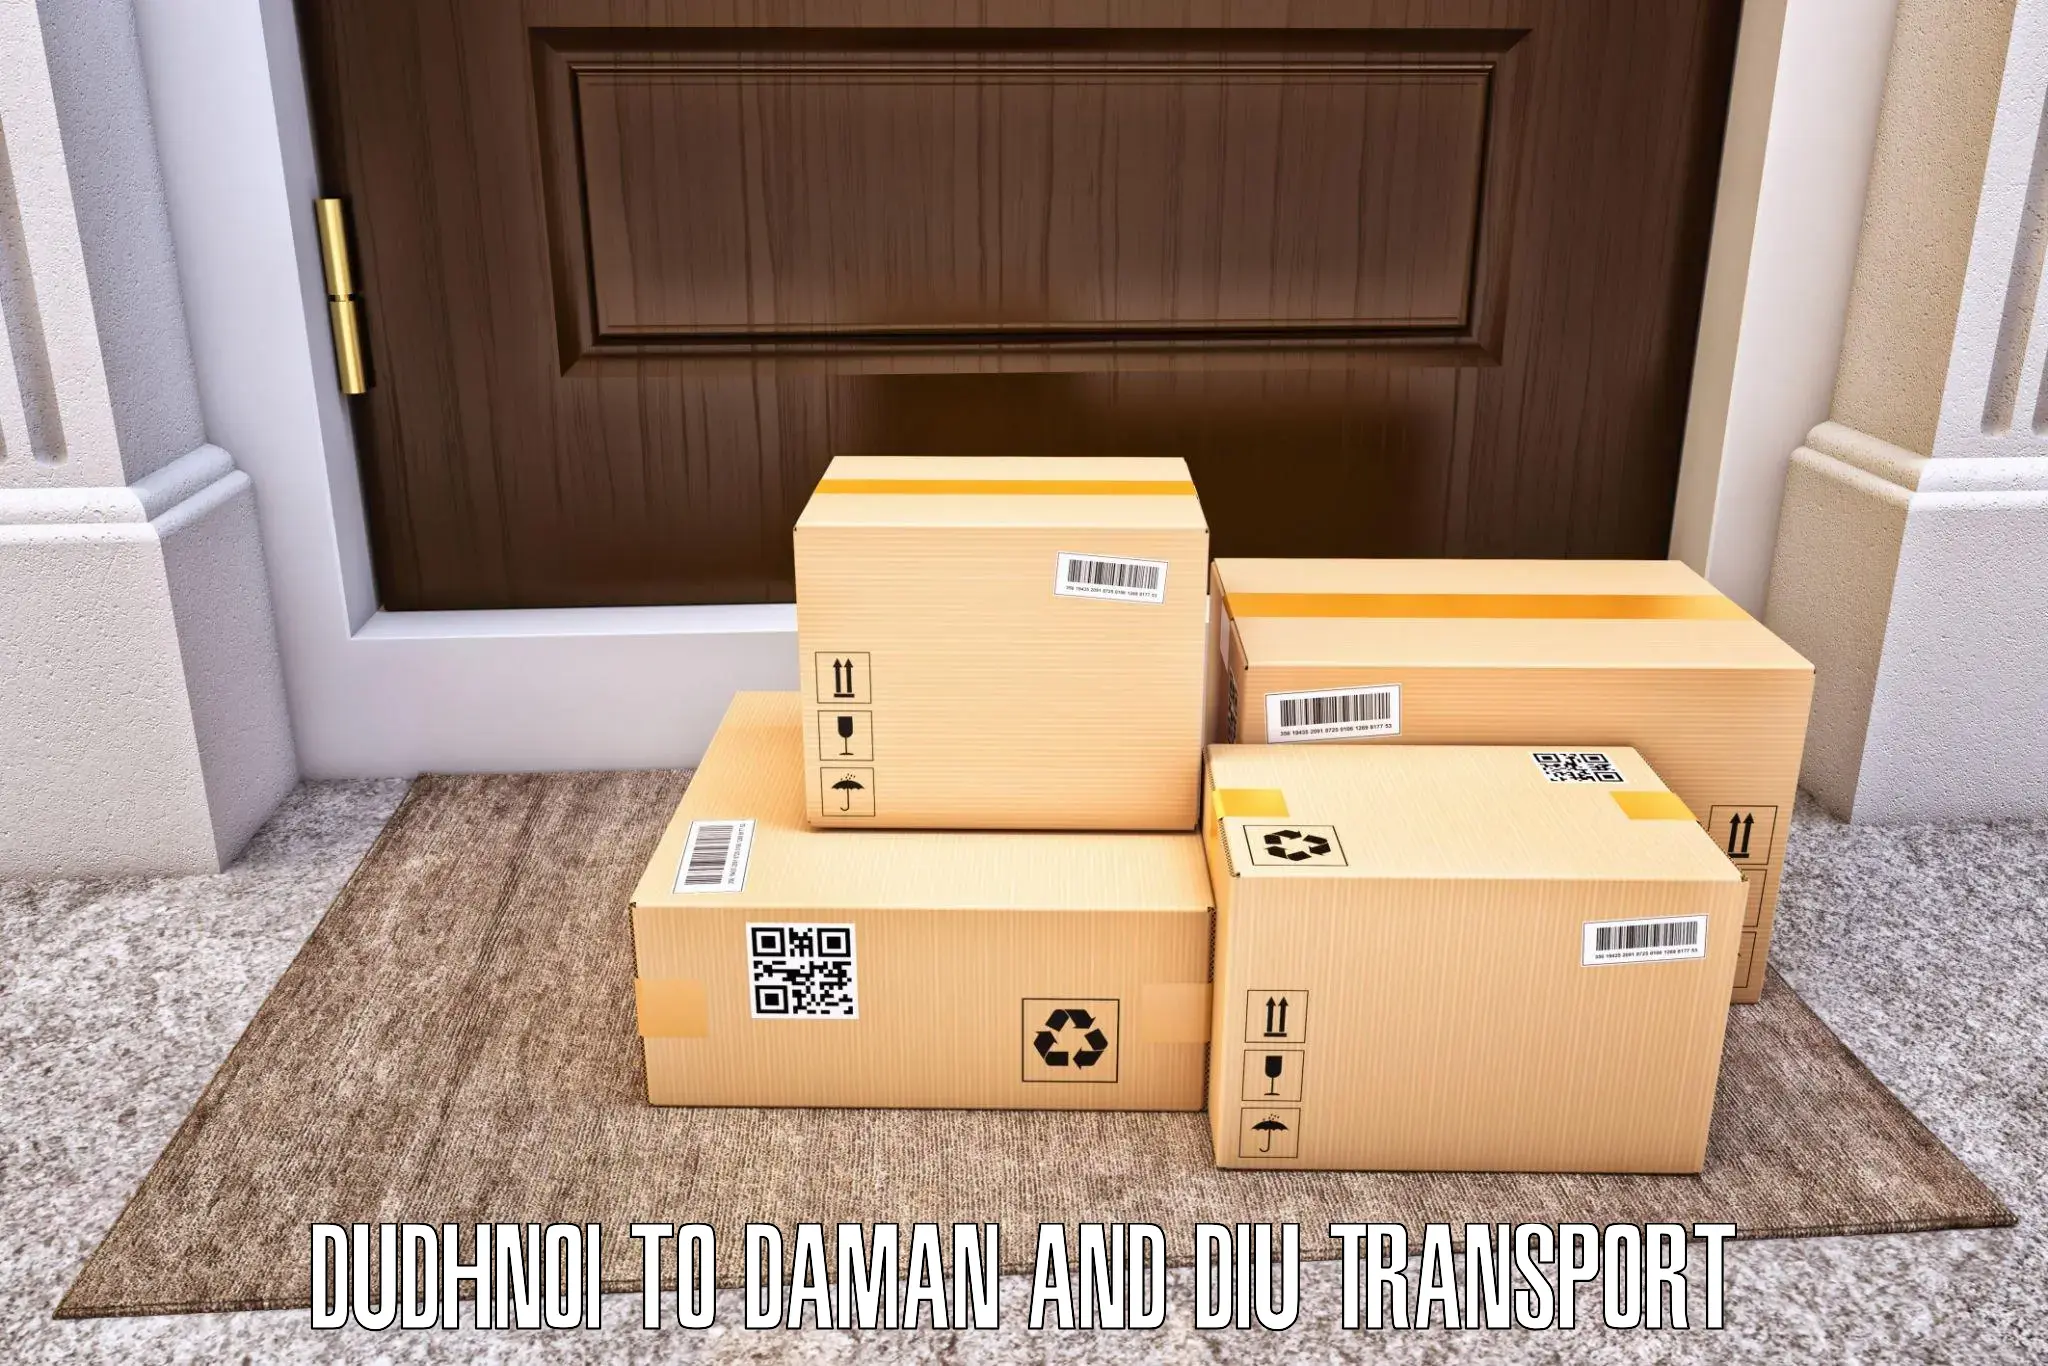 Container transportation services Dudhnoi to Daman and Diu